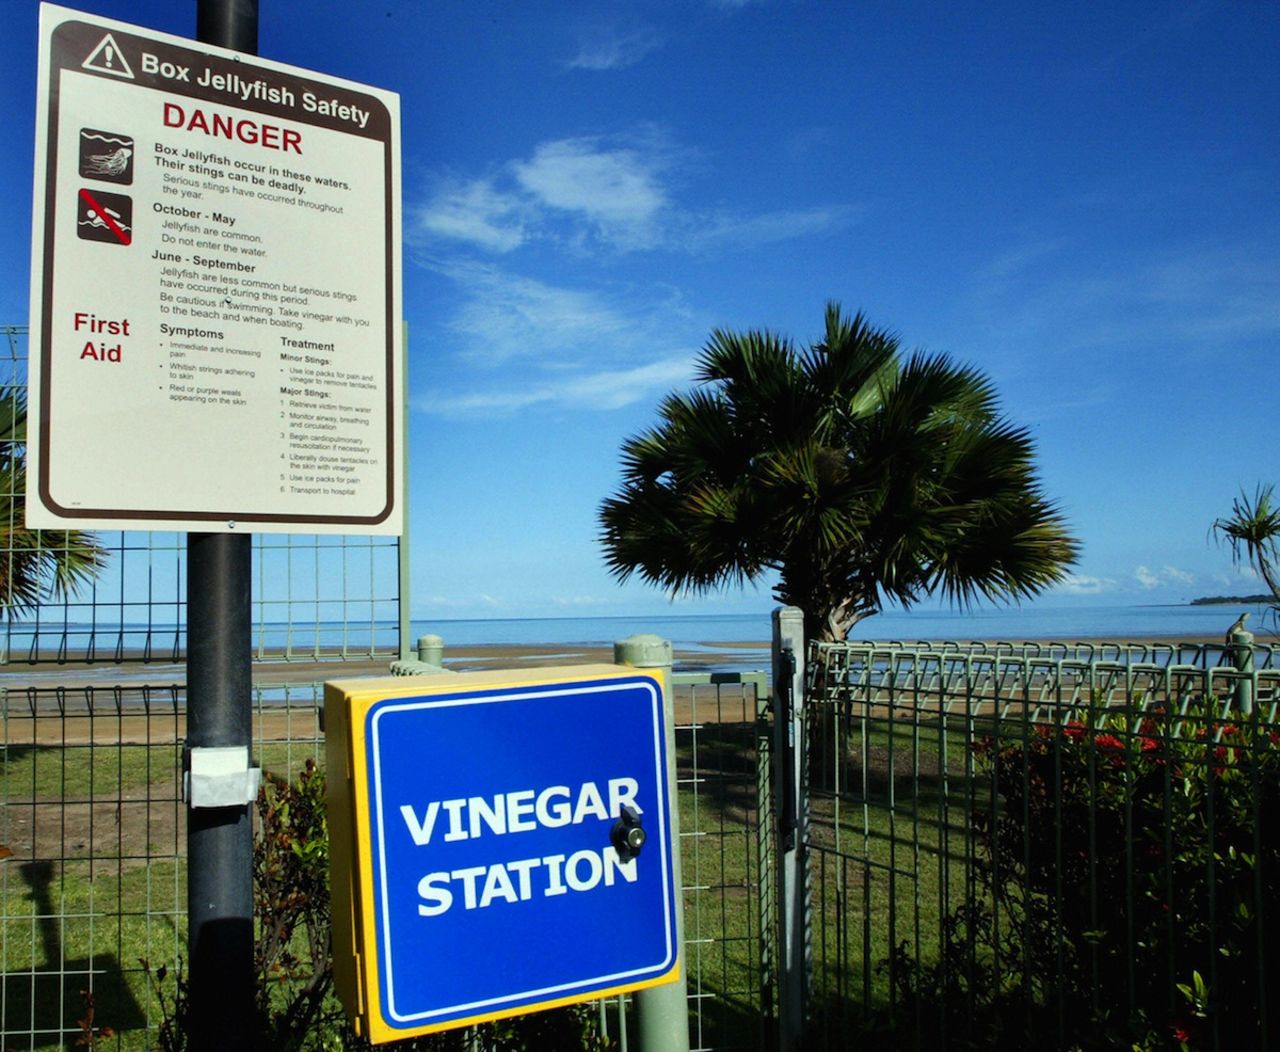 A sign warns against swimming in the sea due to the presence of deadly box jellyfish in Darwin, Australia. A 'Vinegar Station' offers a temporary remedy for those who have been stung. 